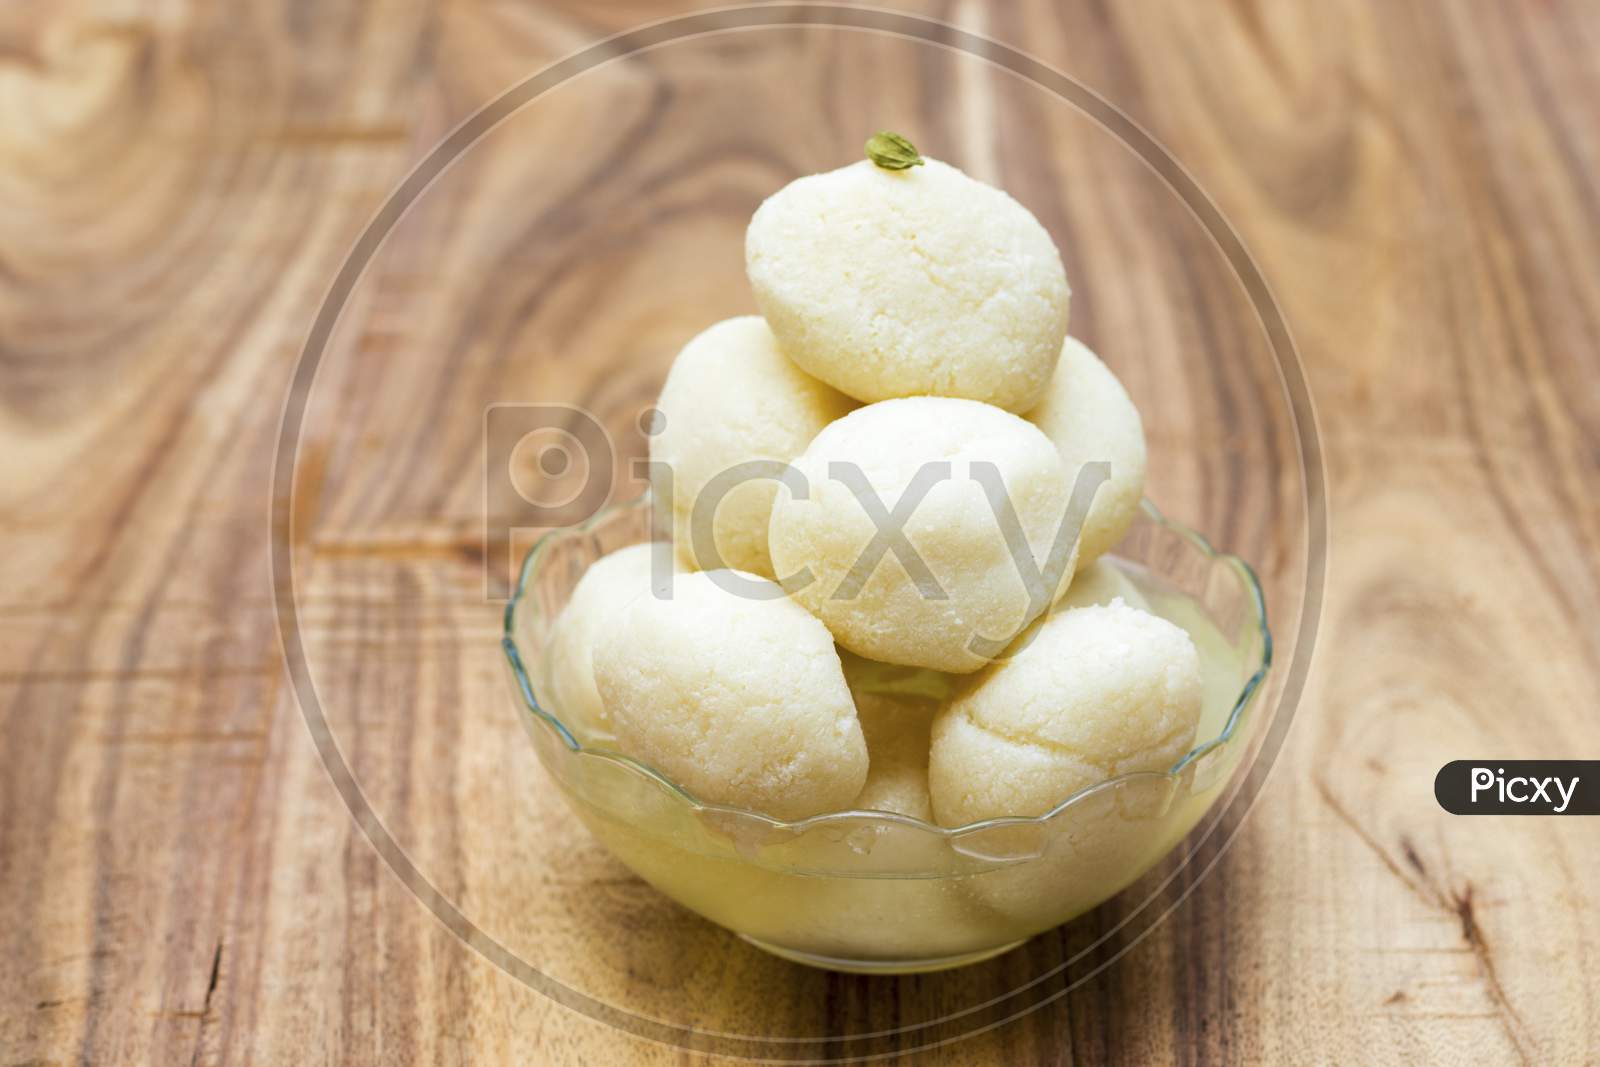 famous Bengali sweet "Rasgulla" is ready to serve